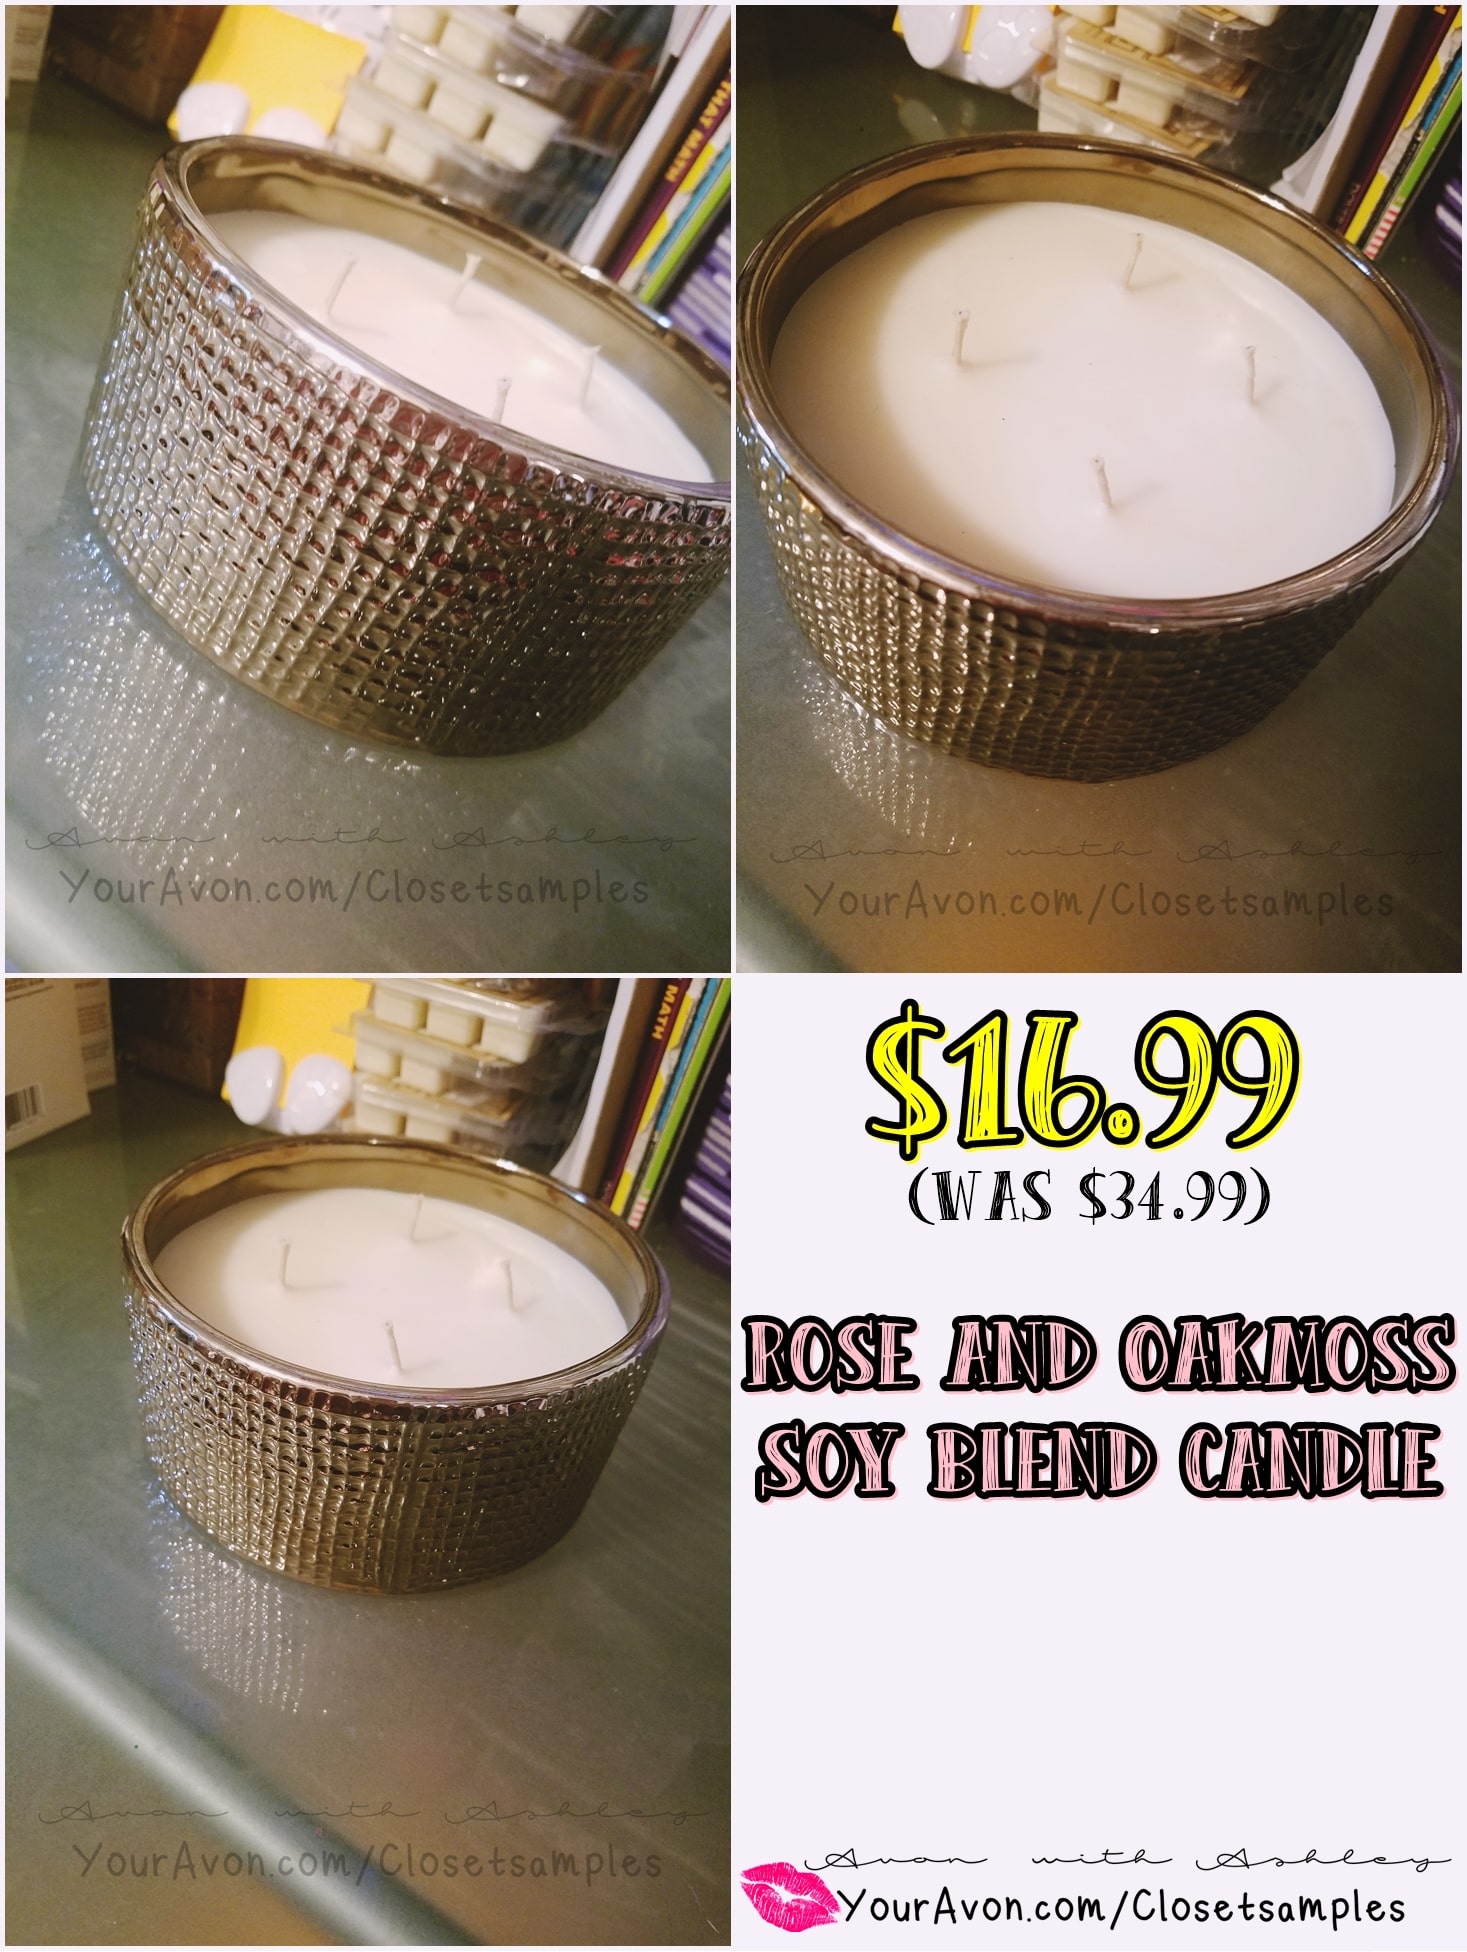 rose-and-oakmoss-soy-blend-candle-avon-review-2019.jpg